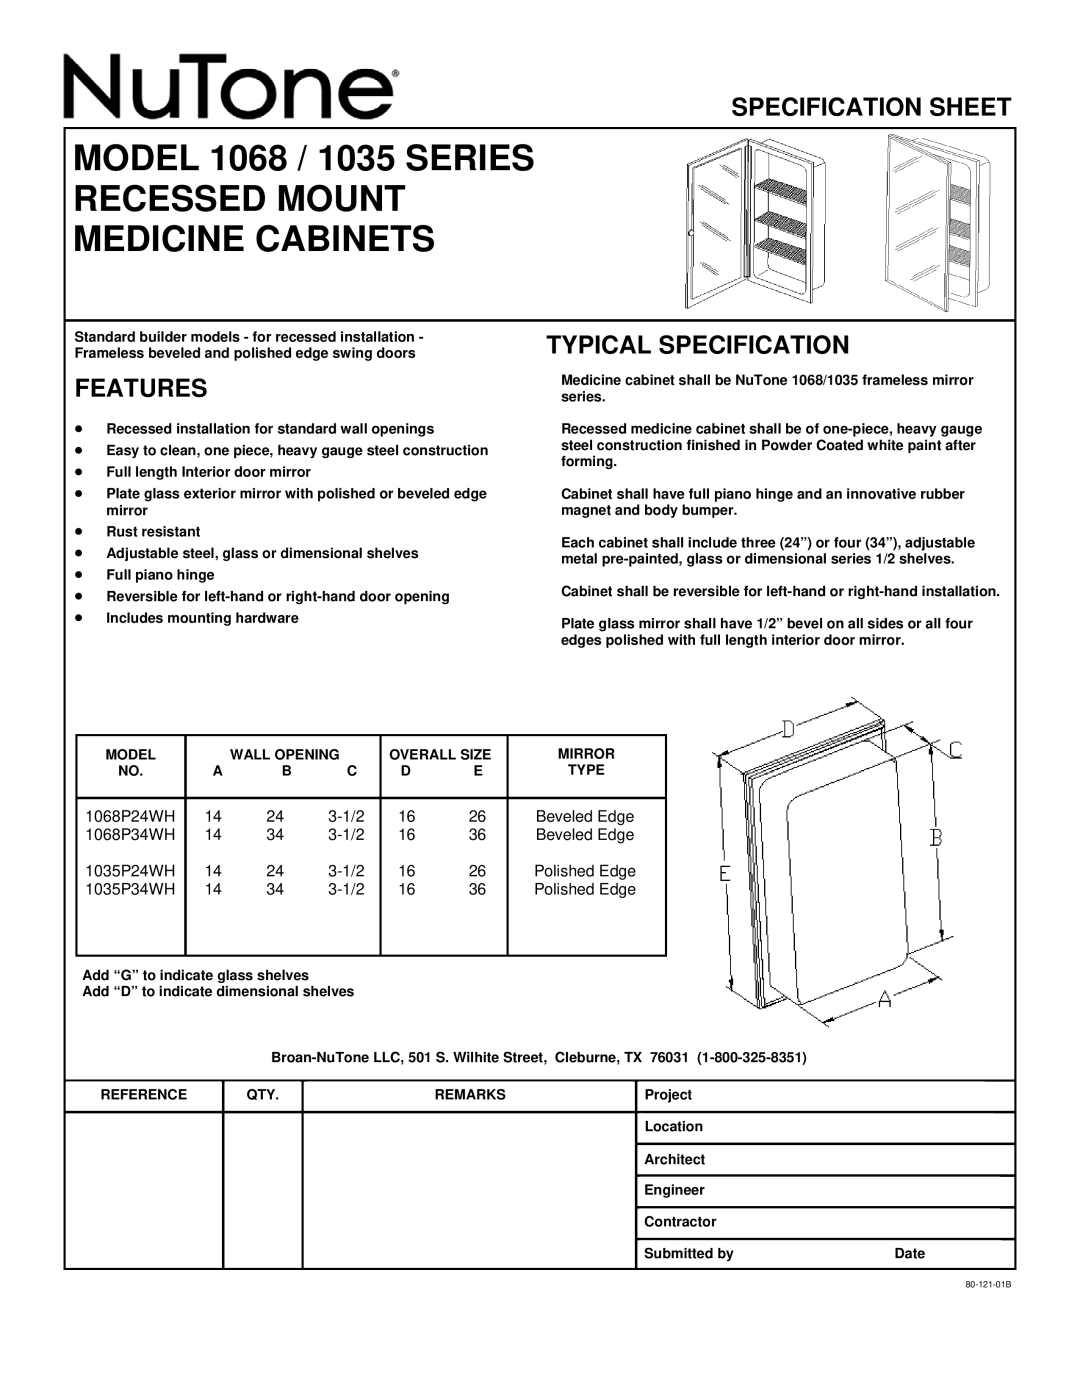 NuTone specifications MODEL 1068 / 1035 SERIES RECESSED MOUNT, Medicine Cabinets, Specification Sheet, Features 